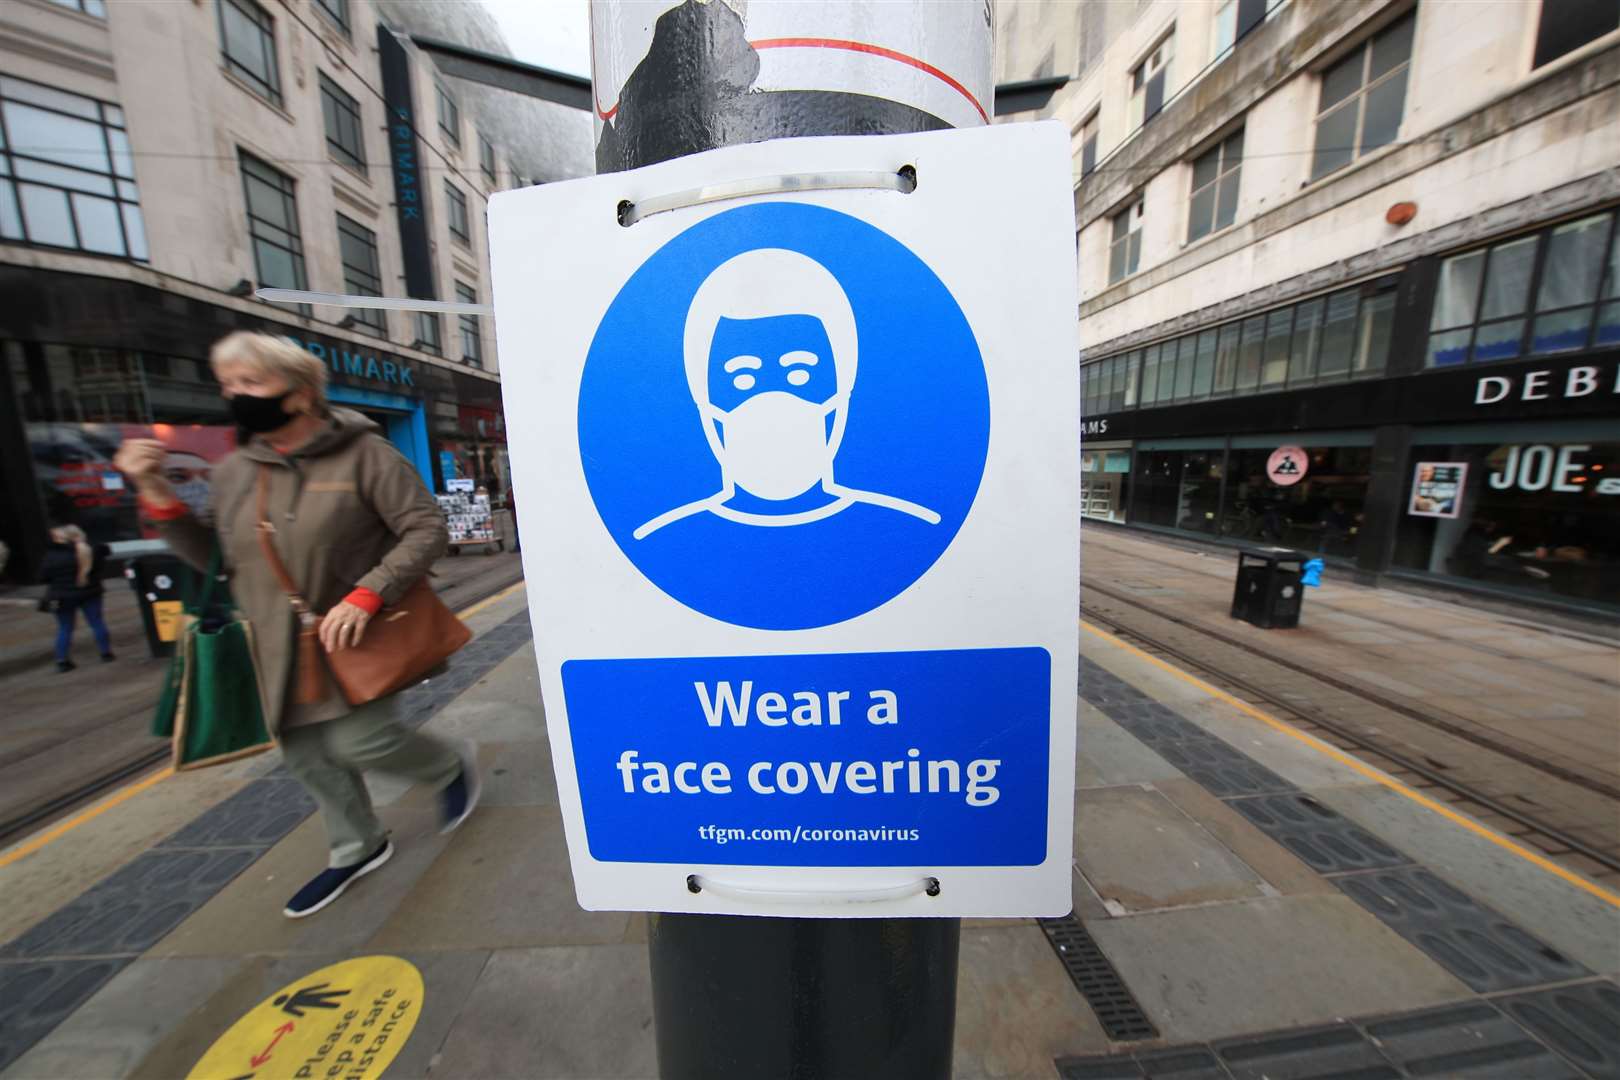 A sign advising on wearing face coverings at a tram stop in Manchester (Danny Lawson/PA)